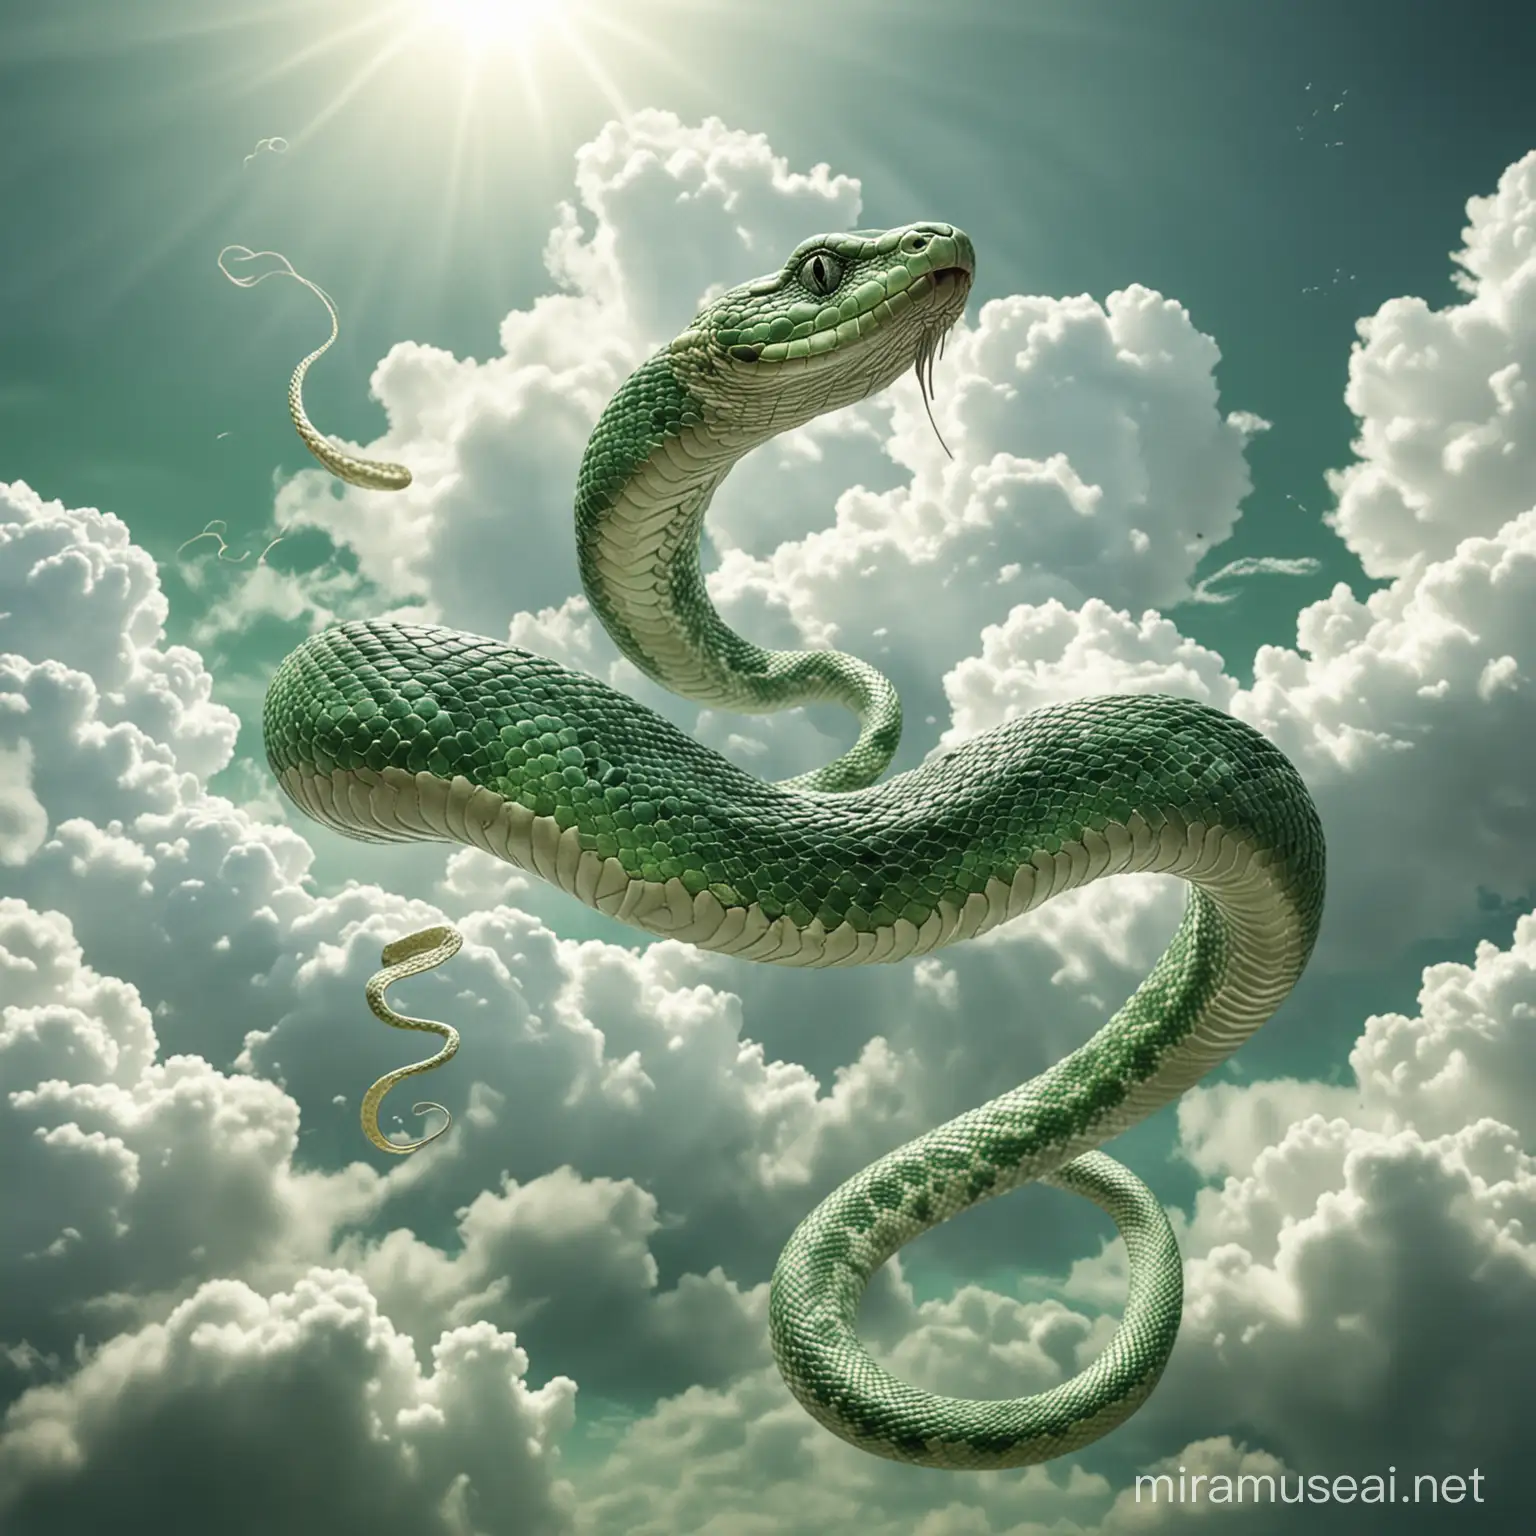 Leaping Auspicious Chinese Snake with Emerald Texture